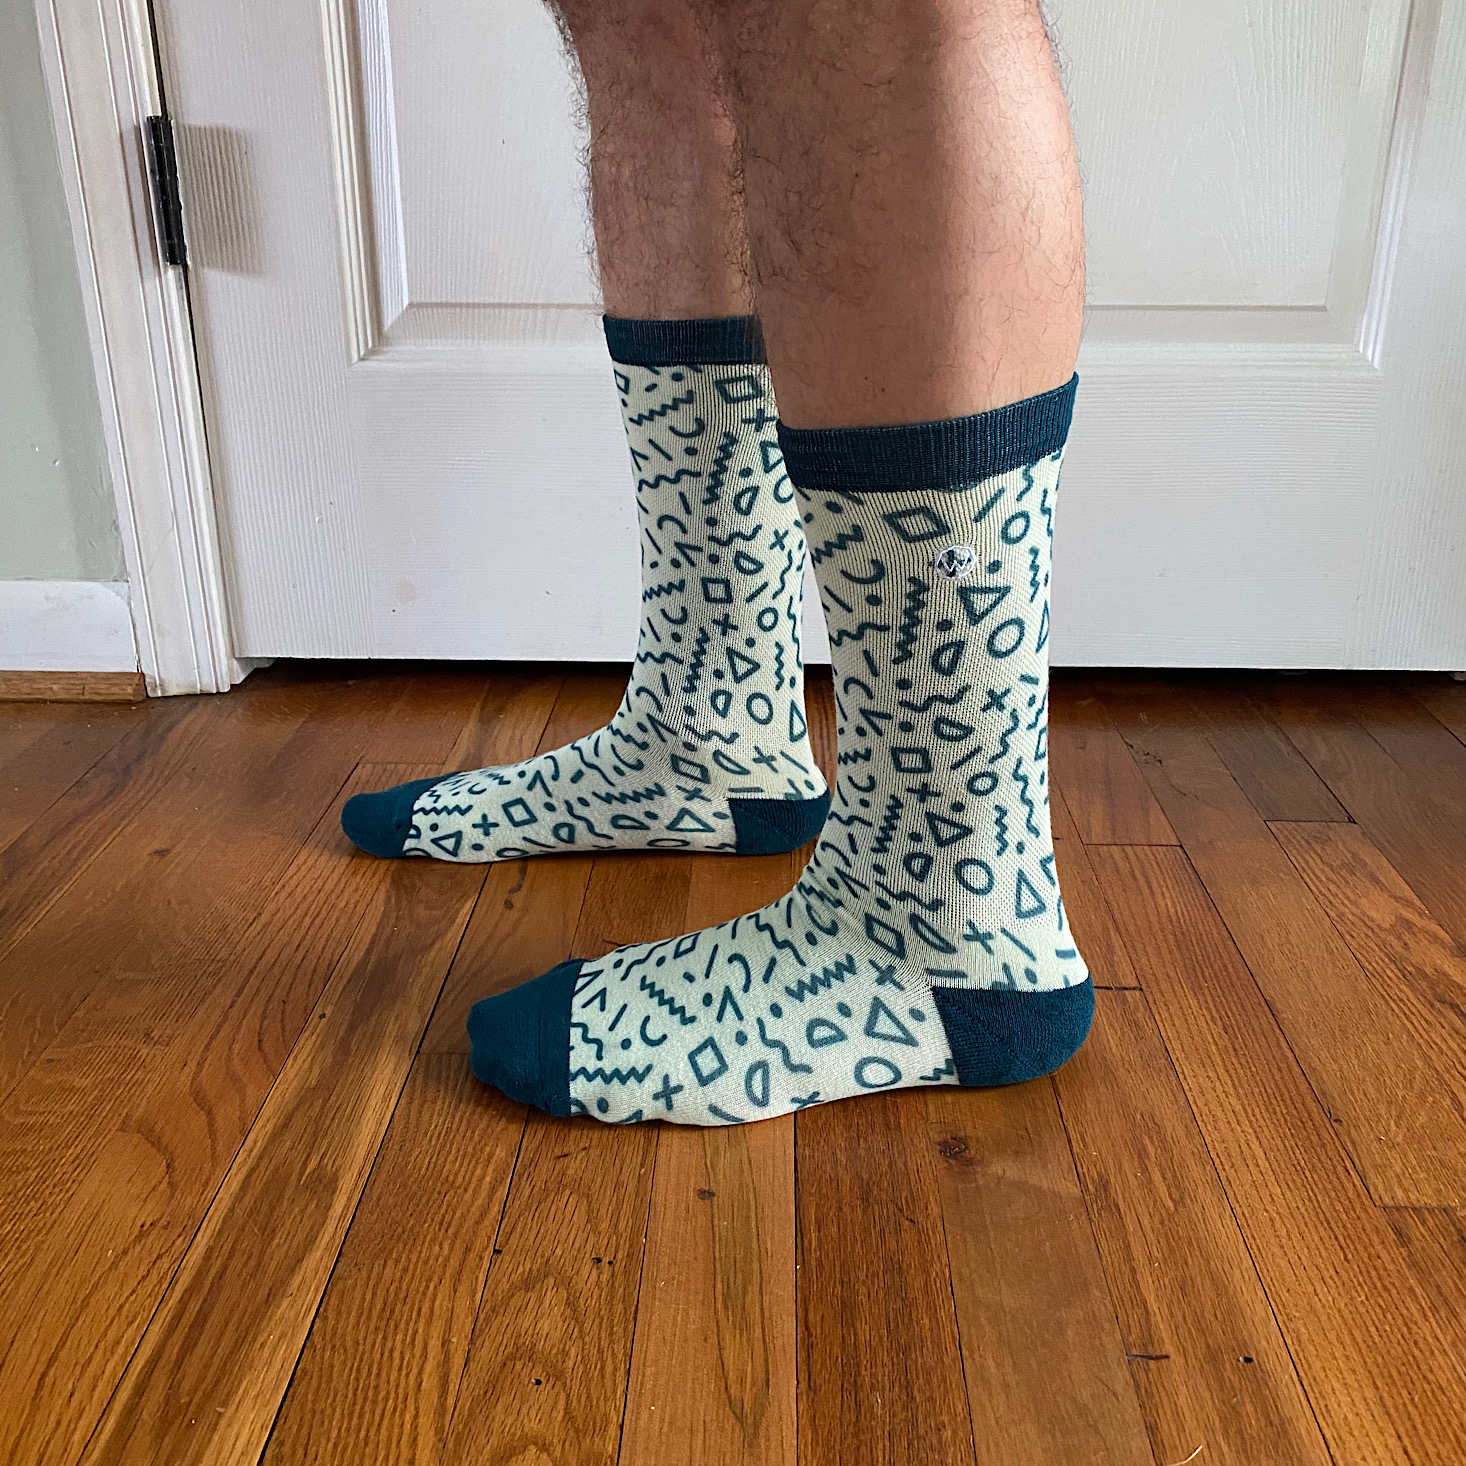 Wohven Socks Subscription Review + Coupon - March 2021 | MSA